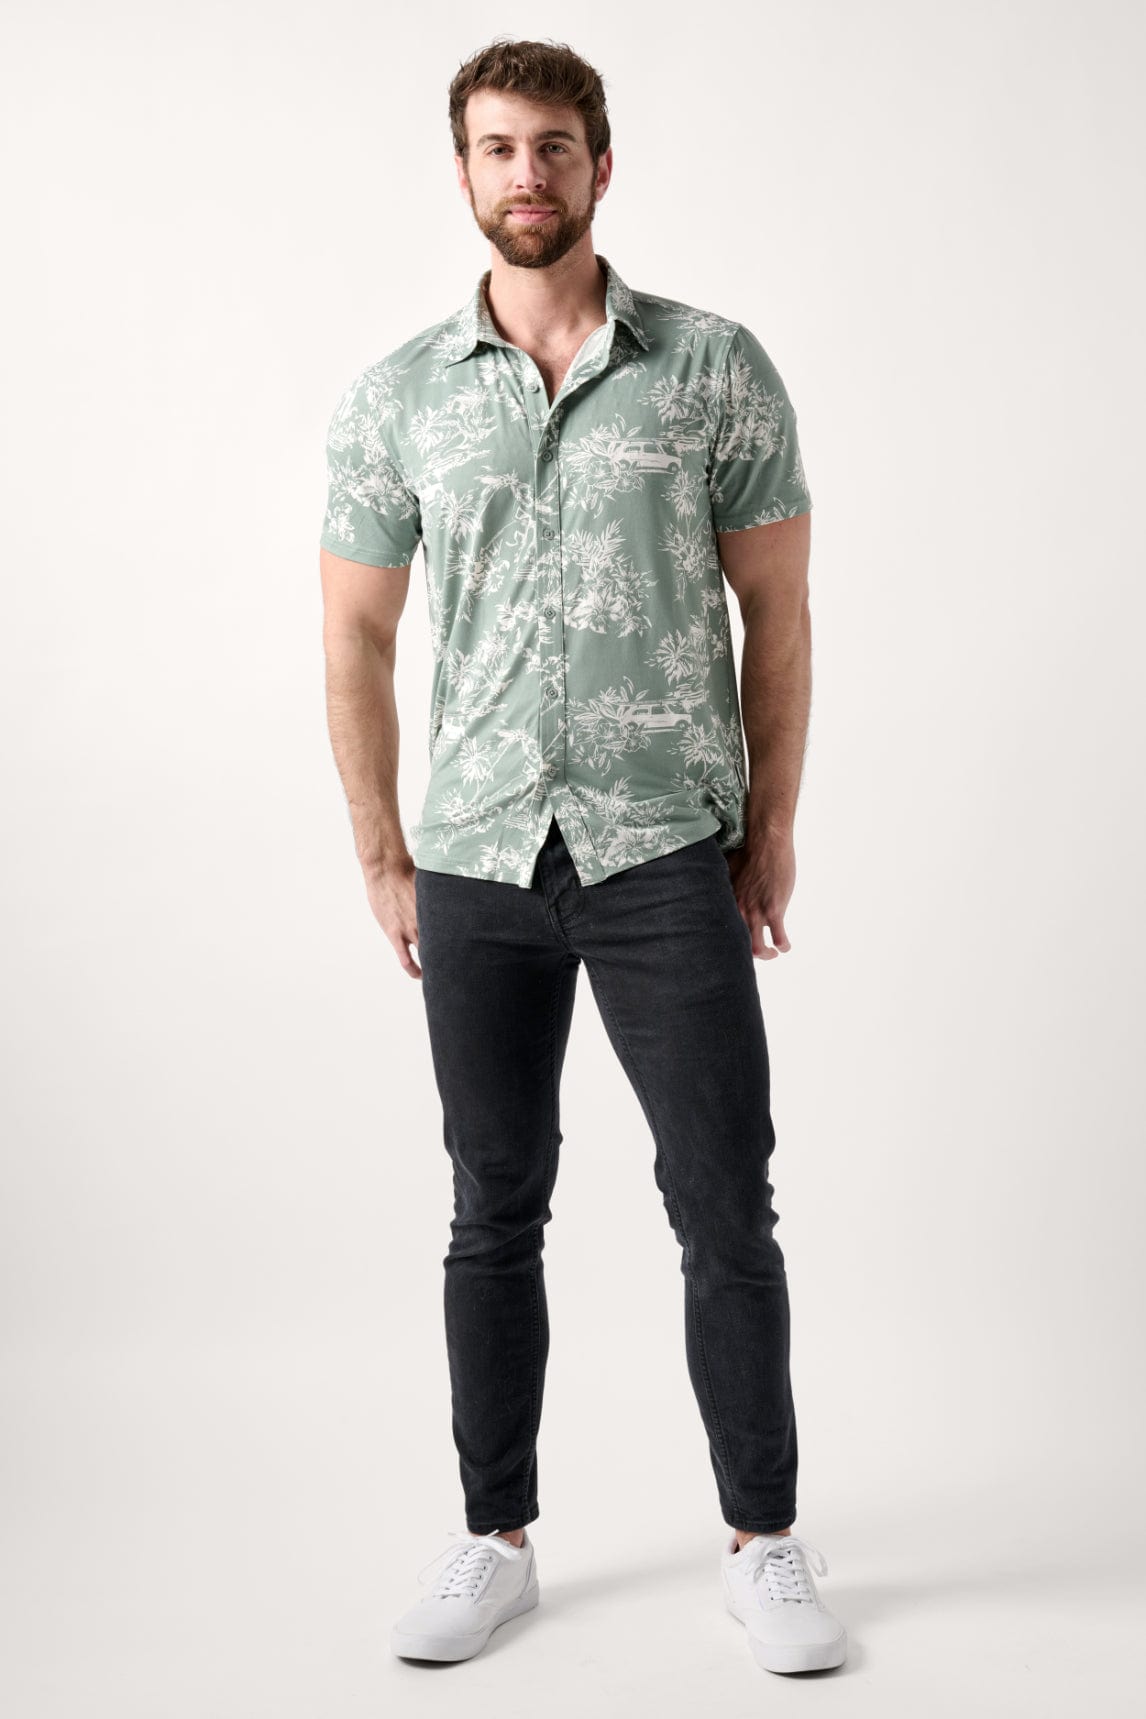 Male model dressed in the WEARFIRST Wanderer Shirt in Chinois Green Vintage Hula